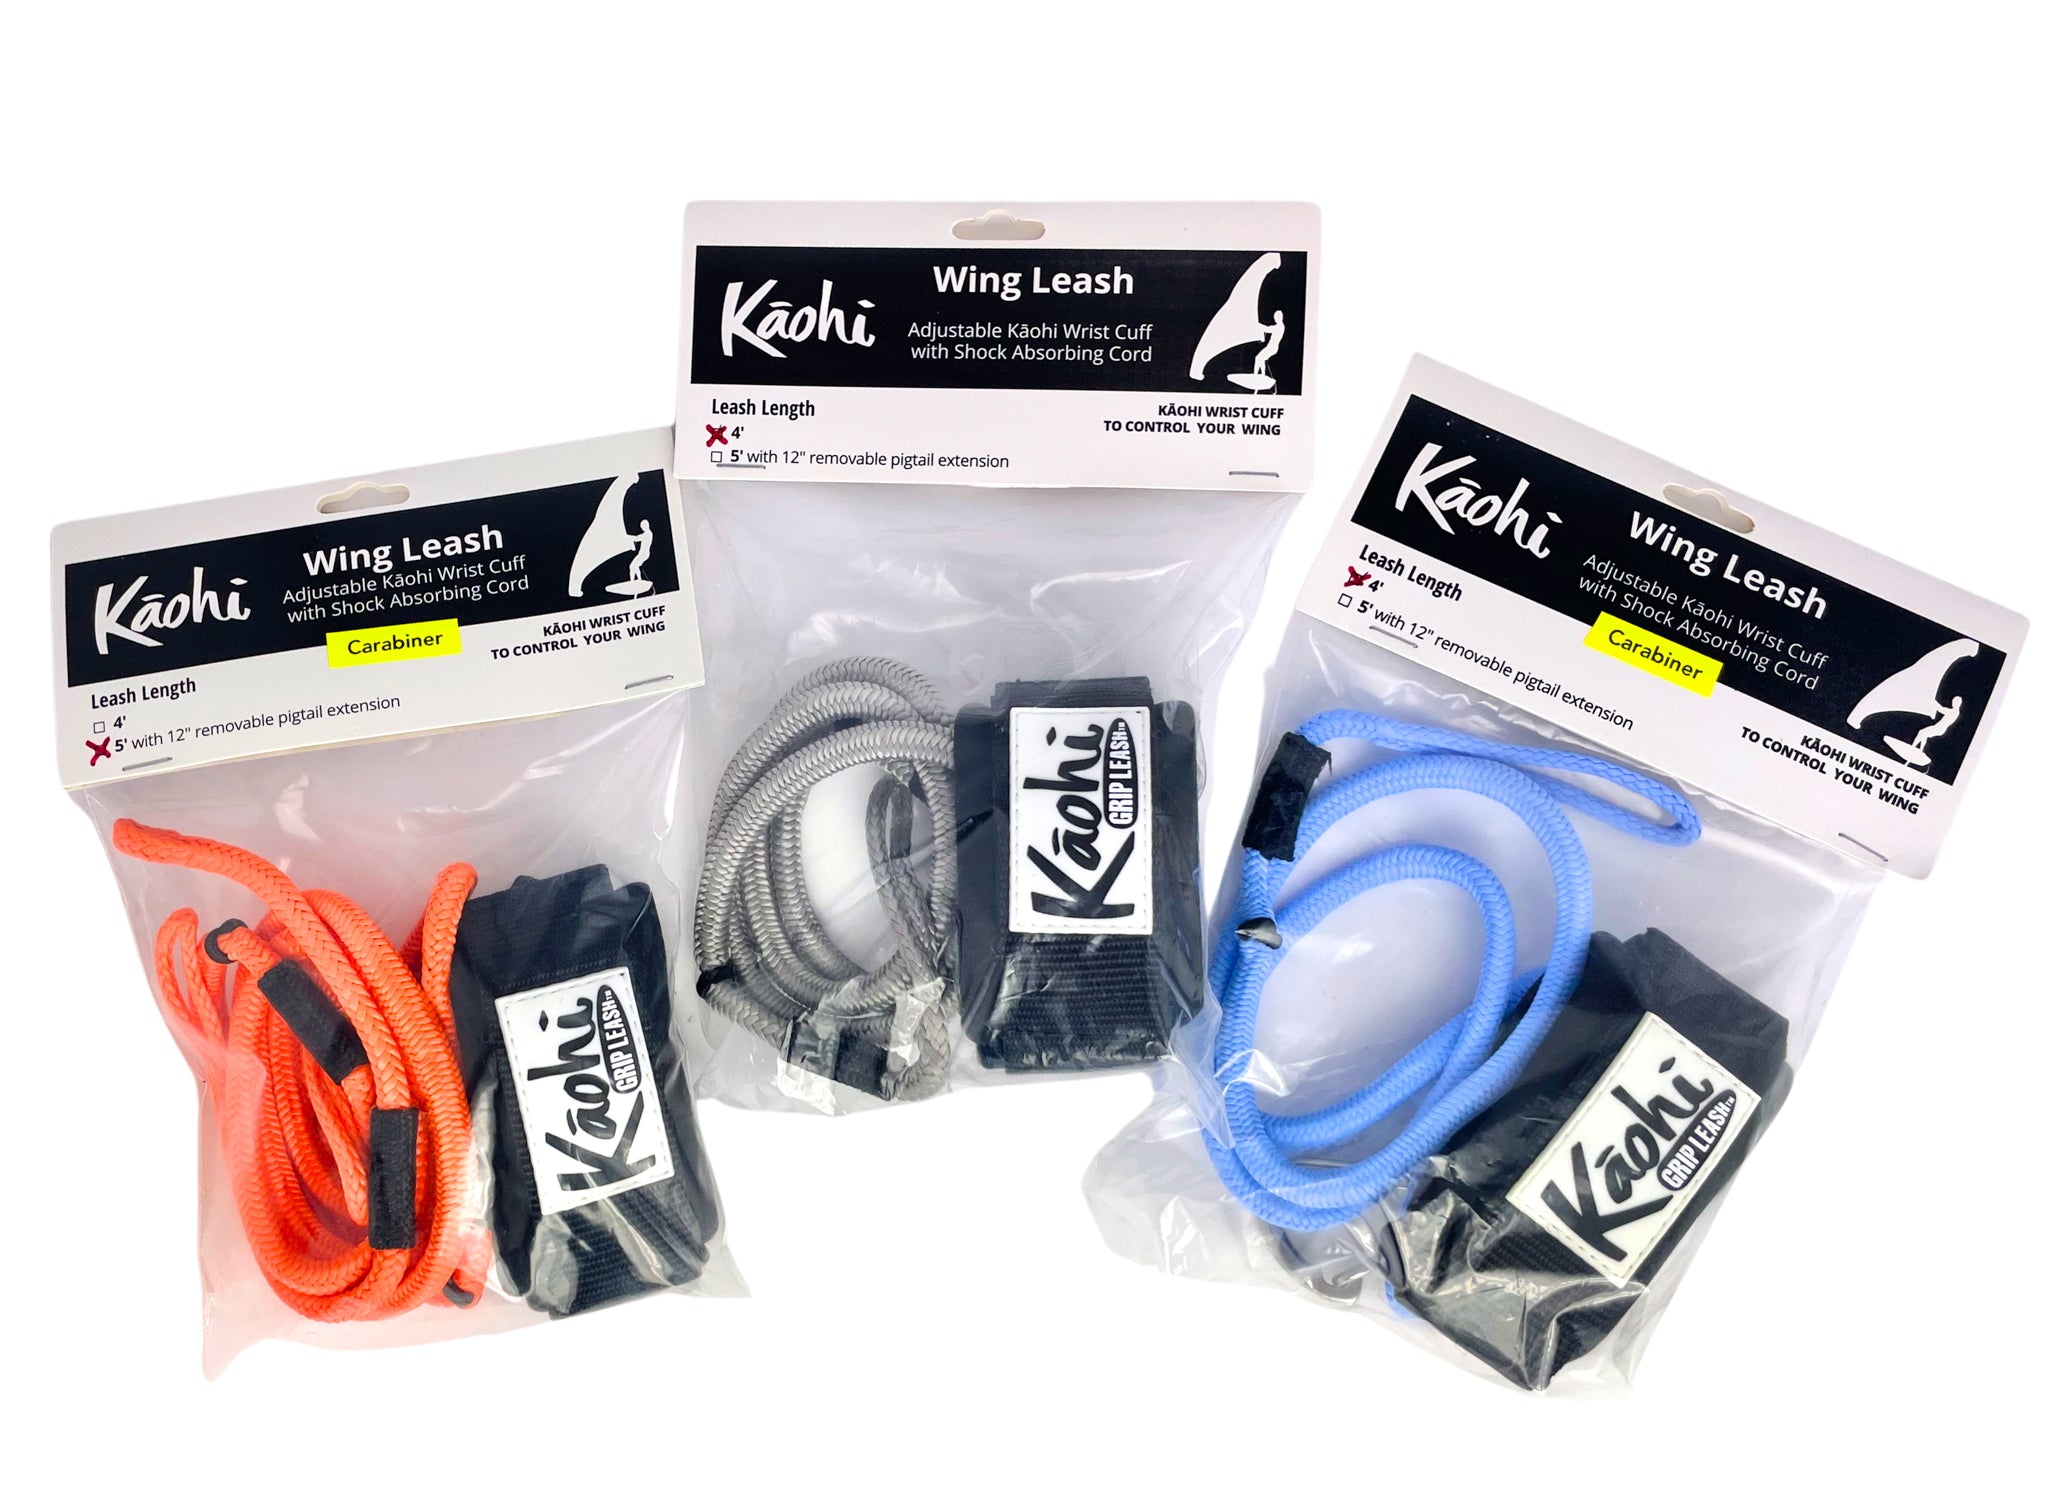 Kāohi Wing Leash with wrist cuff, carabiner, bungee-style leash, retail package orange, gray, blue for wing foiling, hydrofoiling , foil surf wing foil 